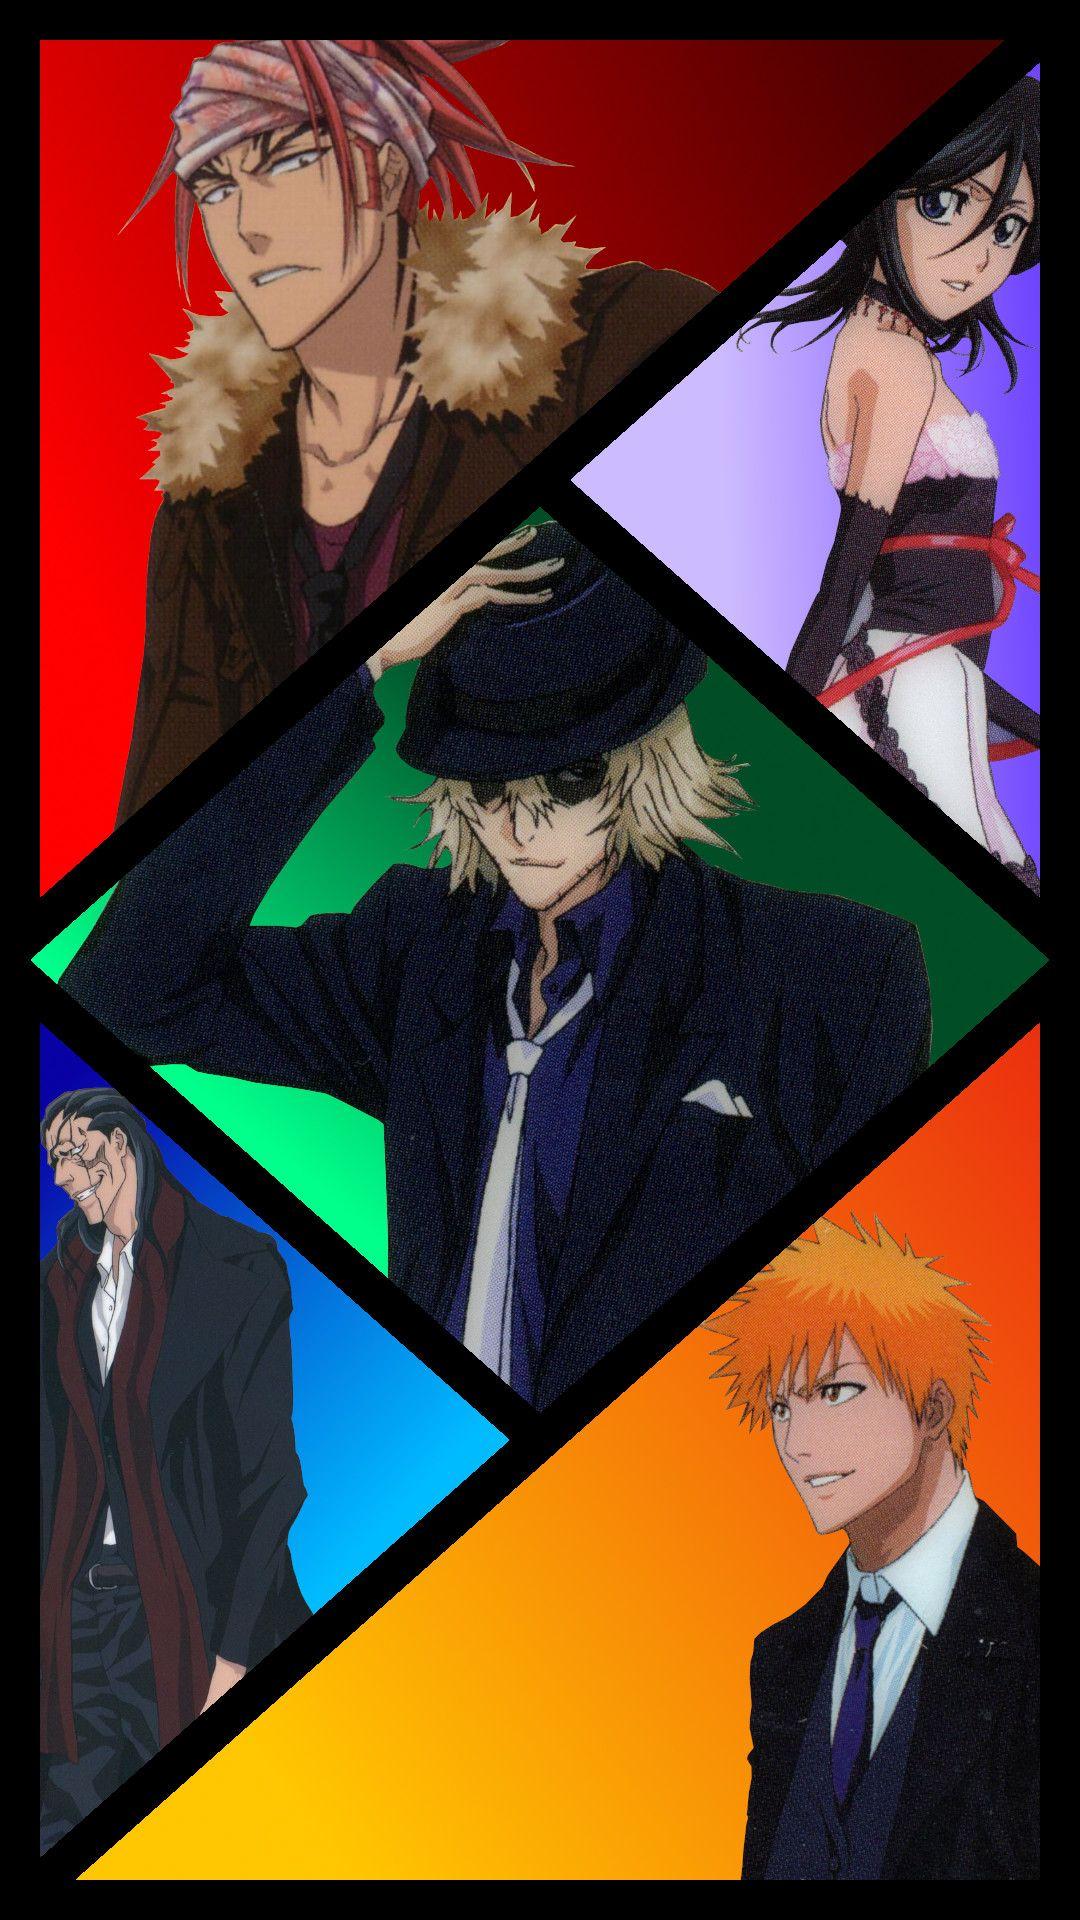 Bleach Wallpaper for mobile phone tablet desktop computer and other  devices HD and 4K wallpapers  Bleach anime ichigo Bleach anime art  Bleach anime